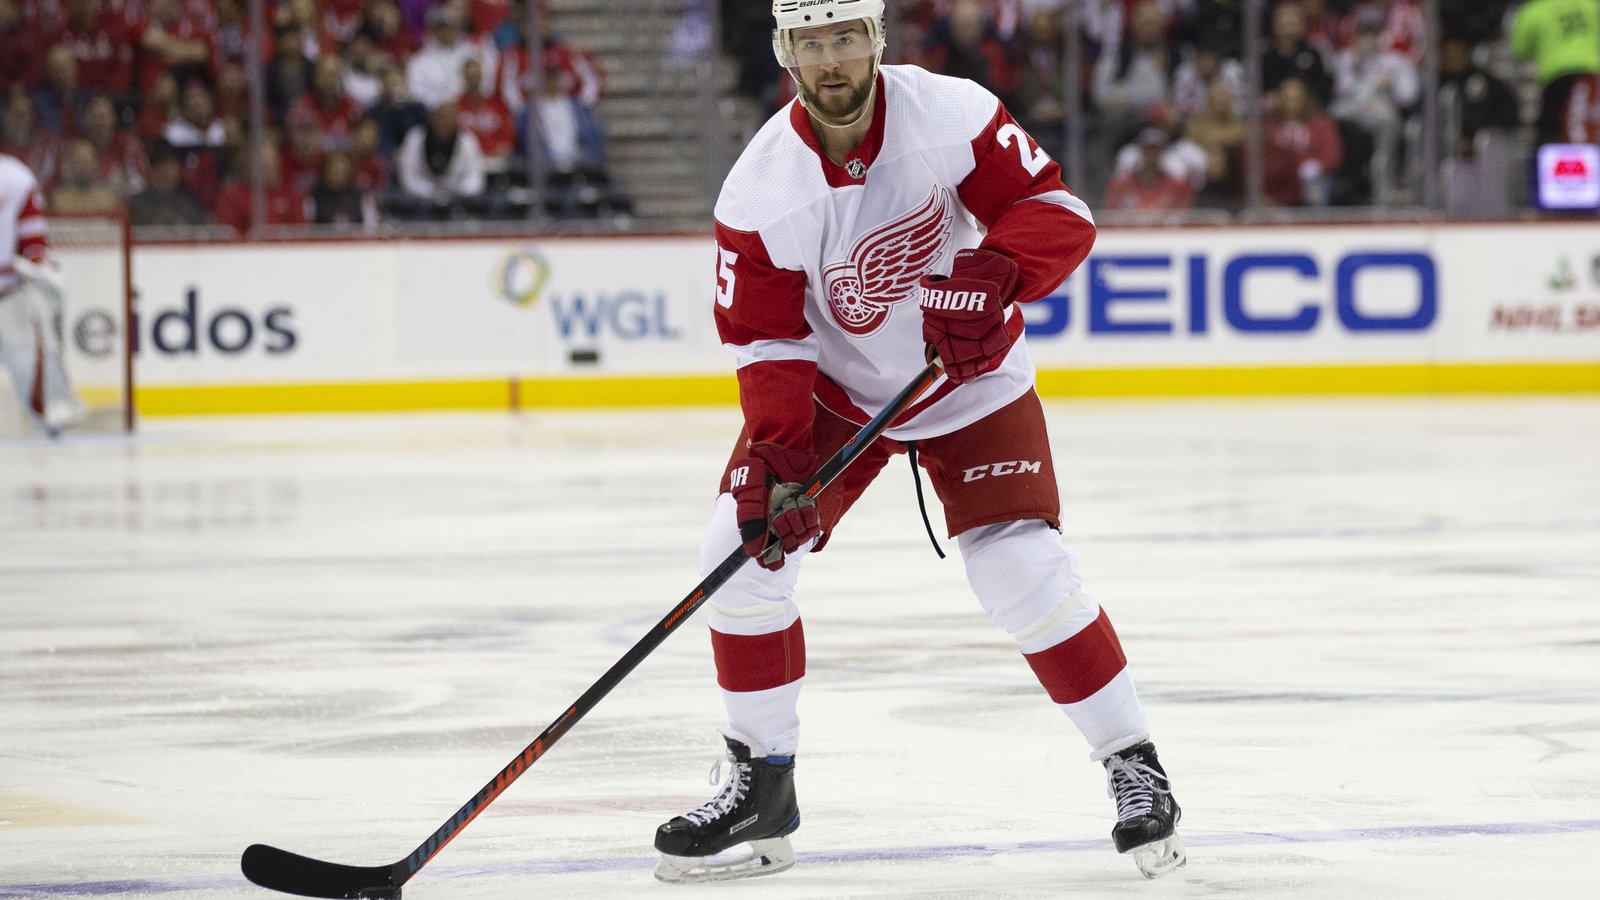 Tough blow for the Wings as veteran trio is sidelined through injury